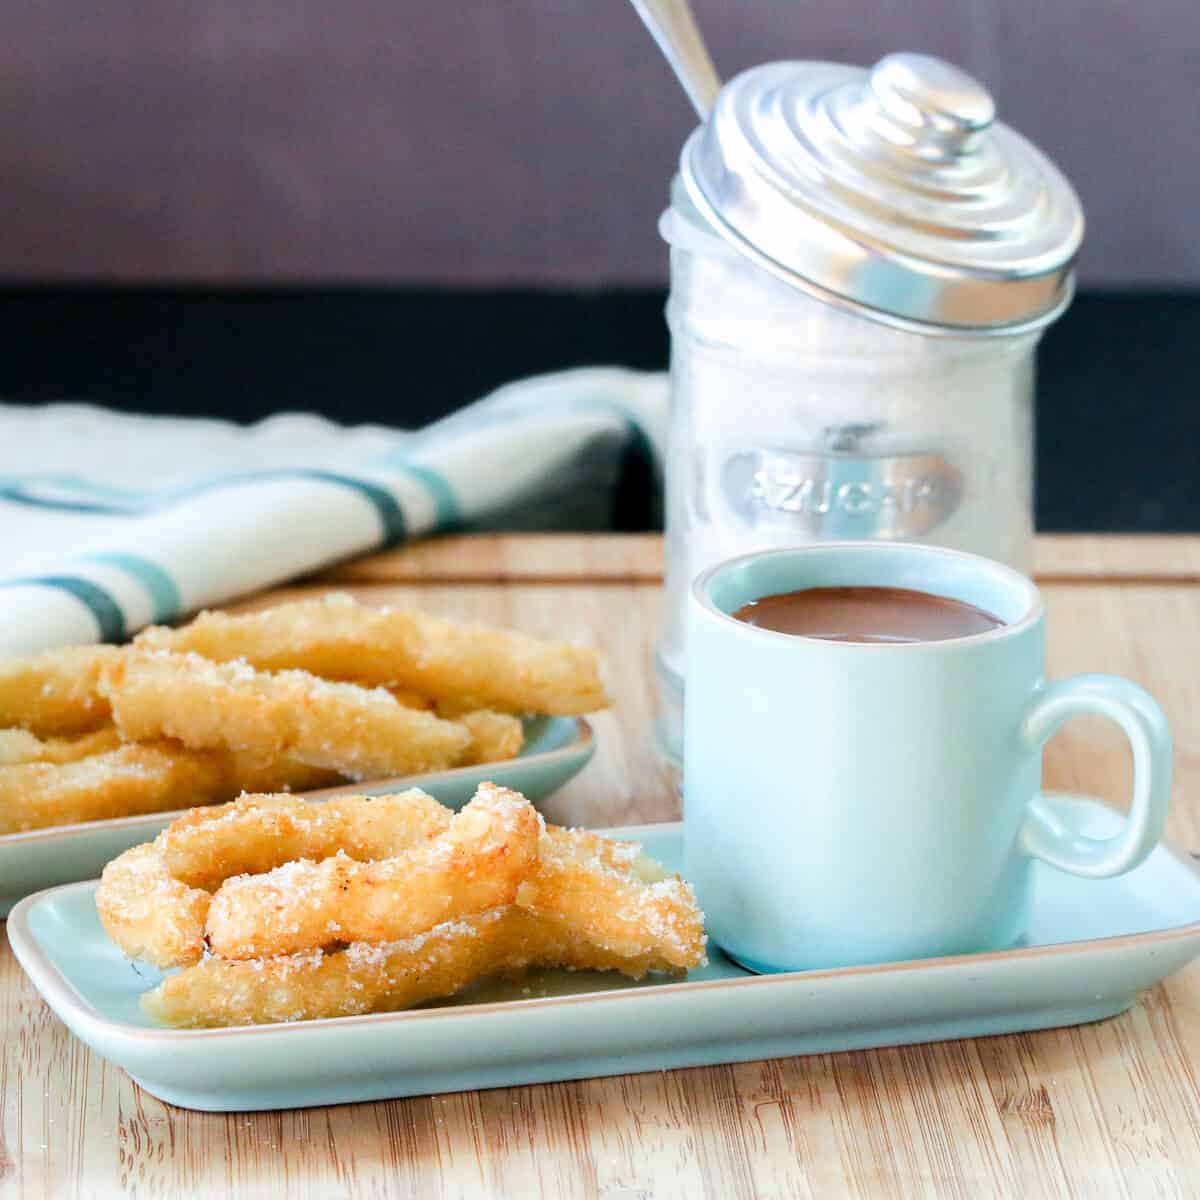 Easy Gluten-Free Churros Recipe [+ How-To Video]